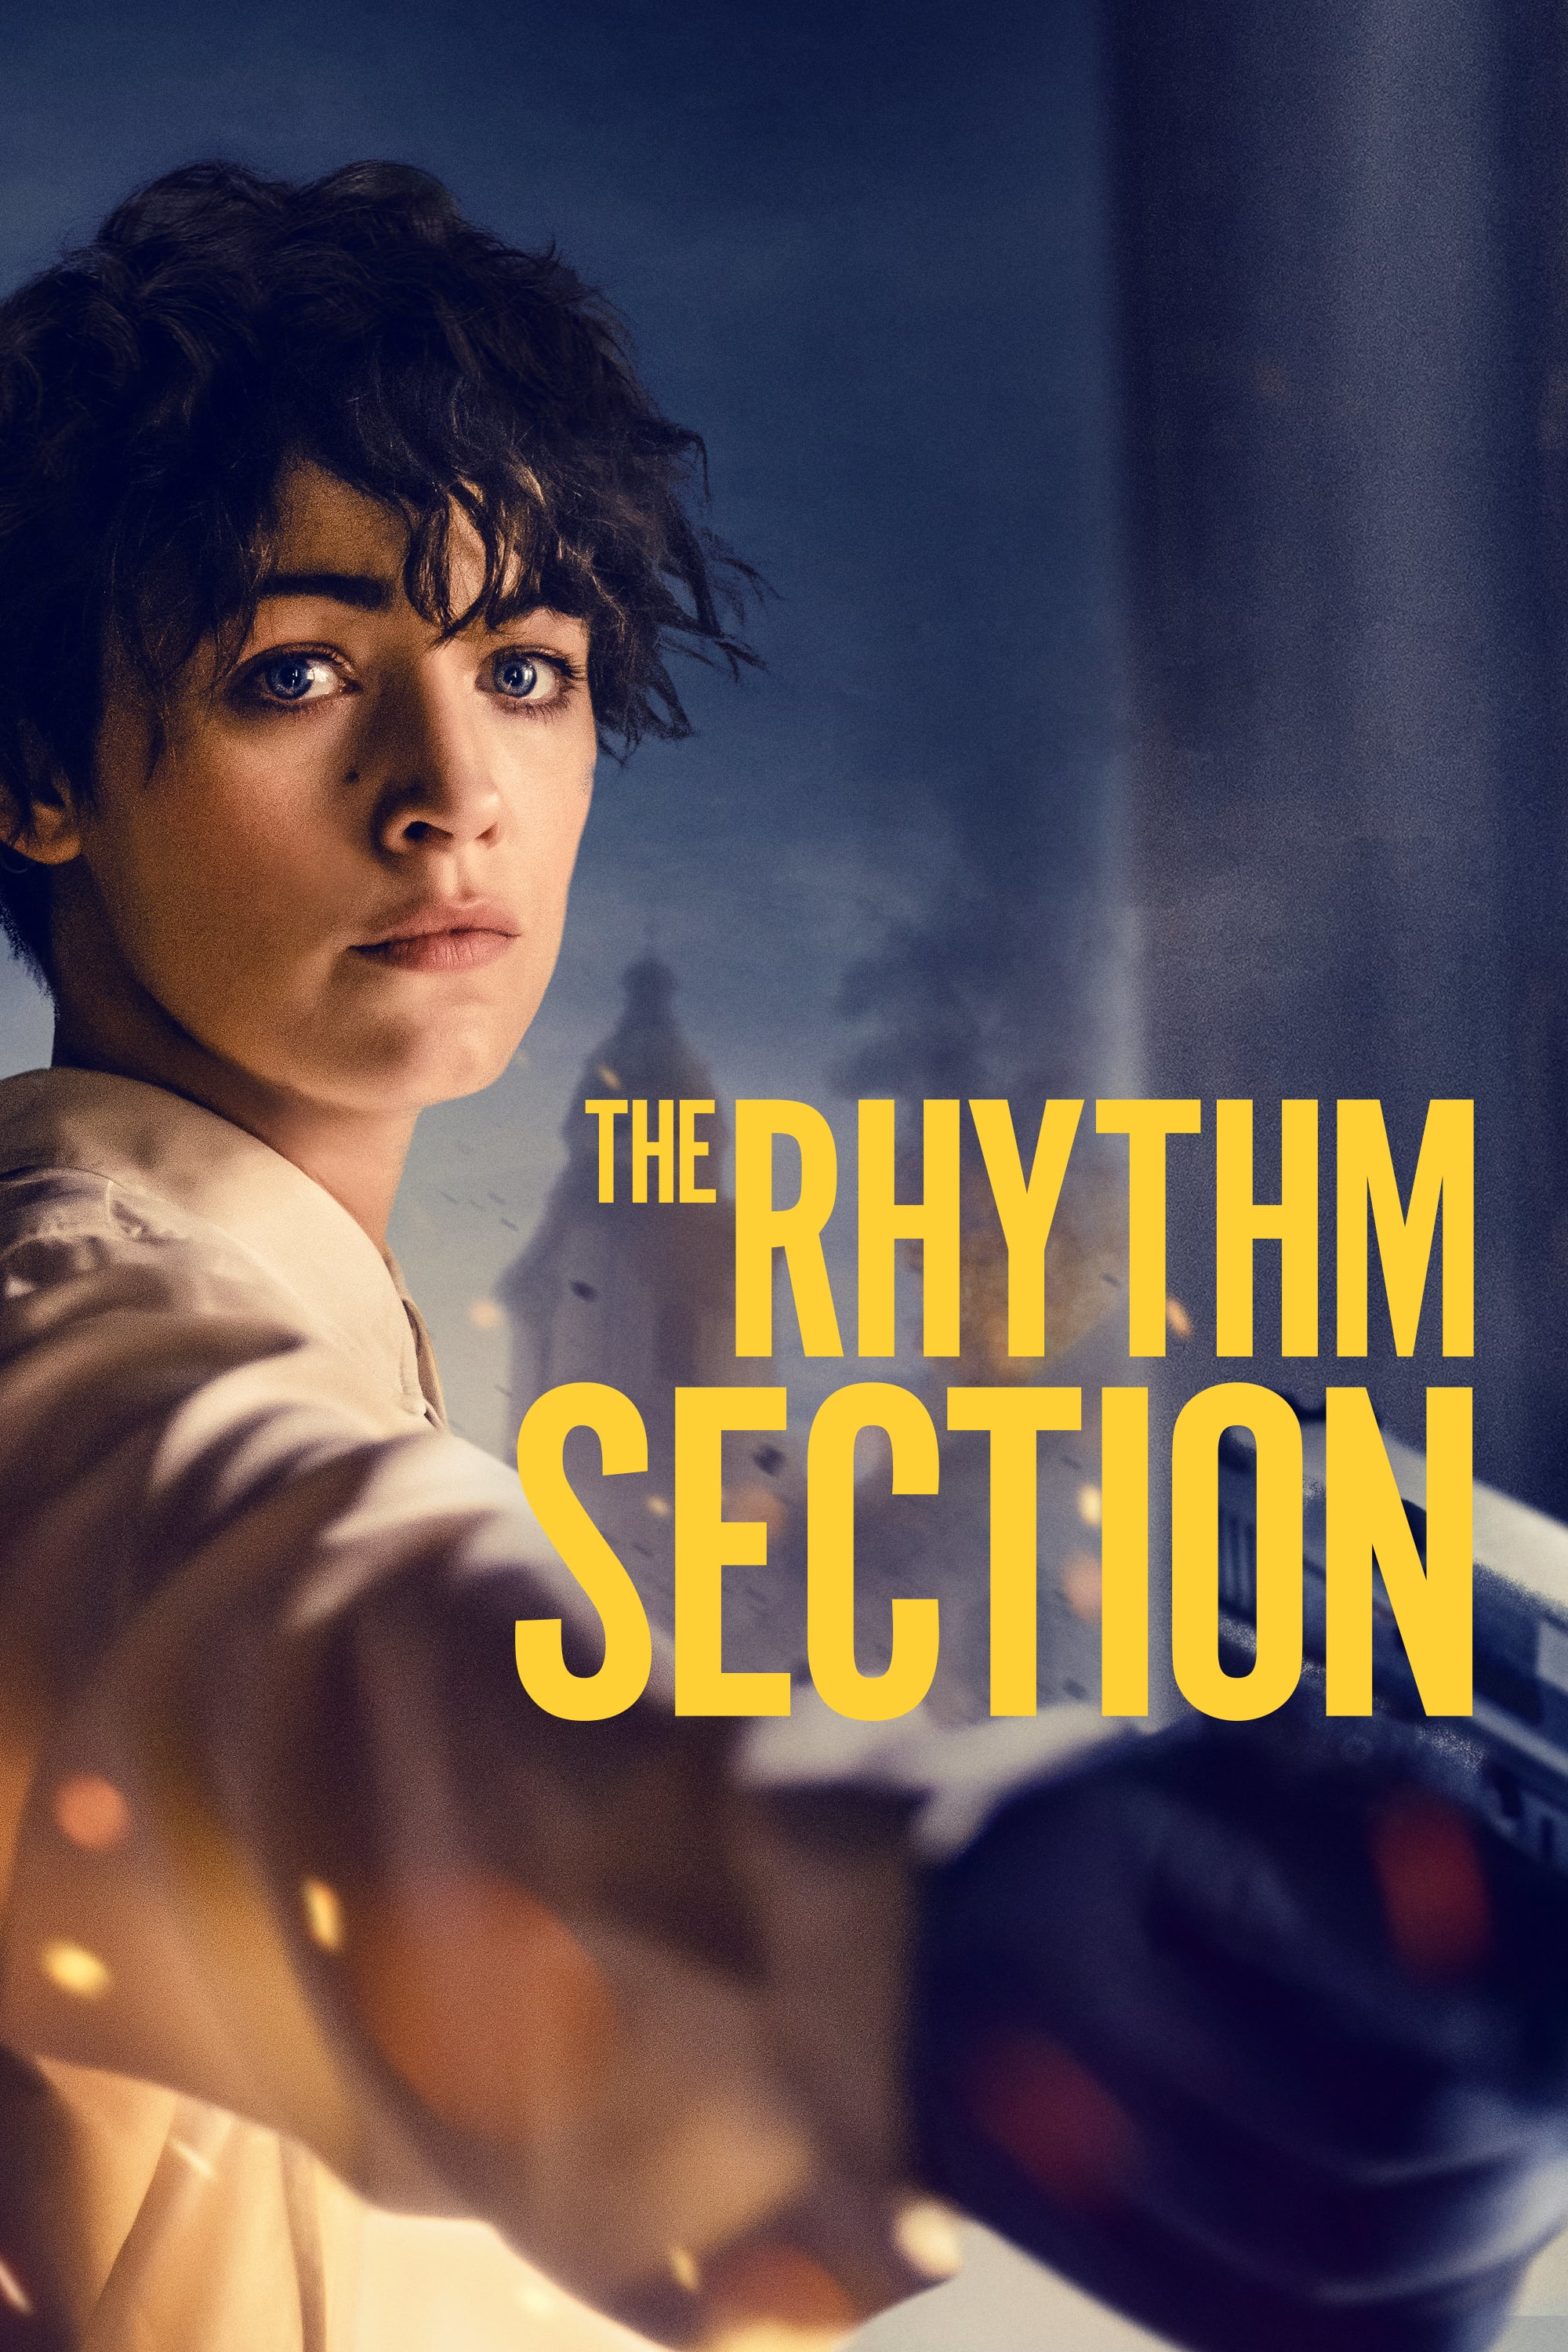 Poster for the movie "The Rhythm Section"